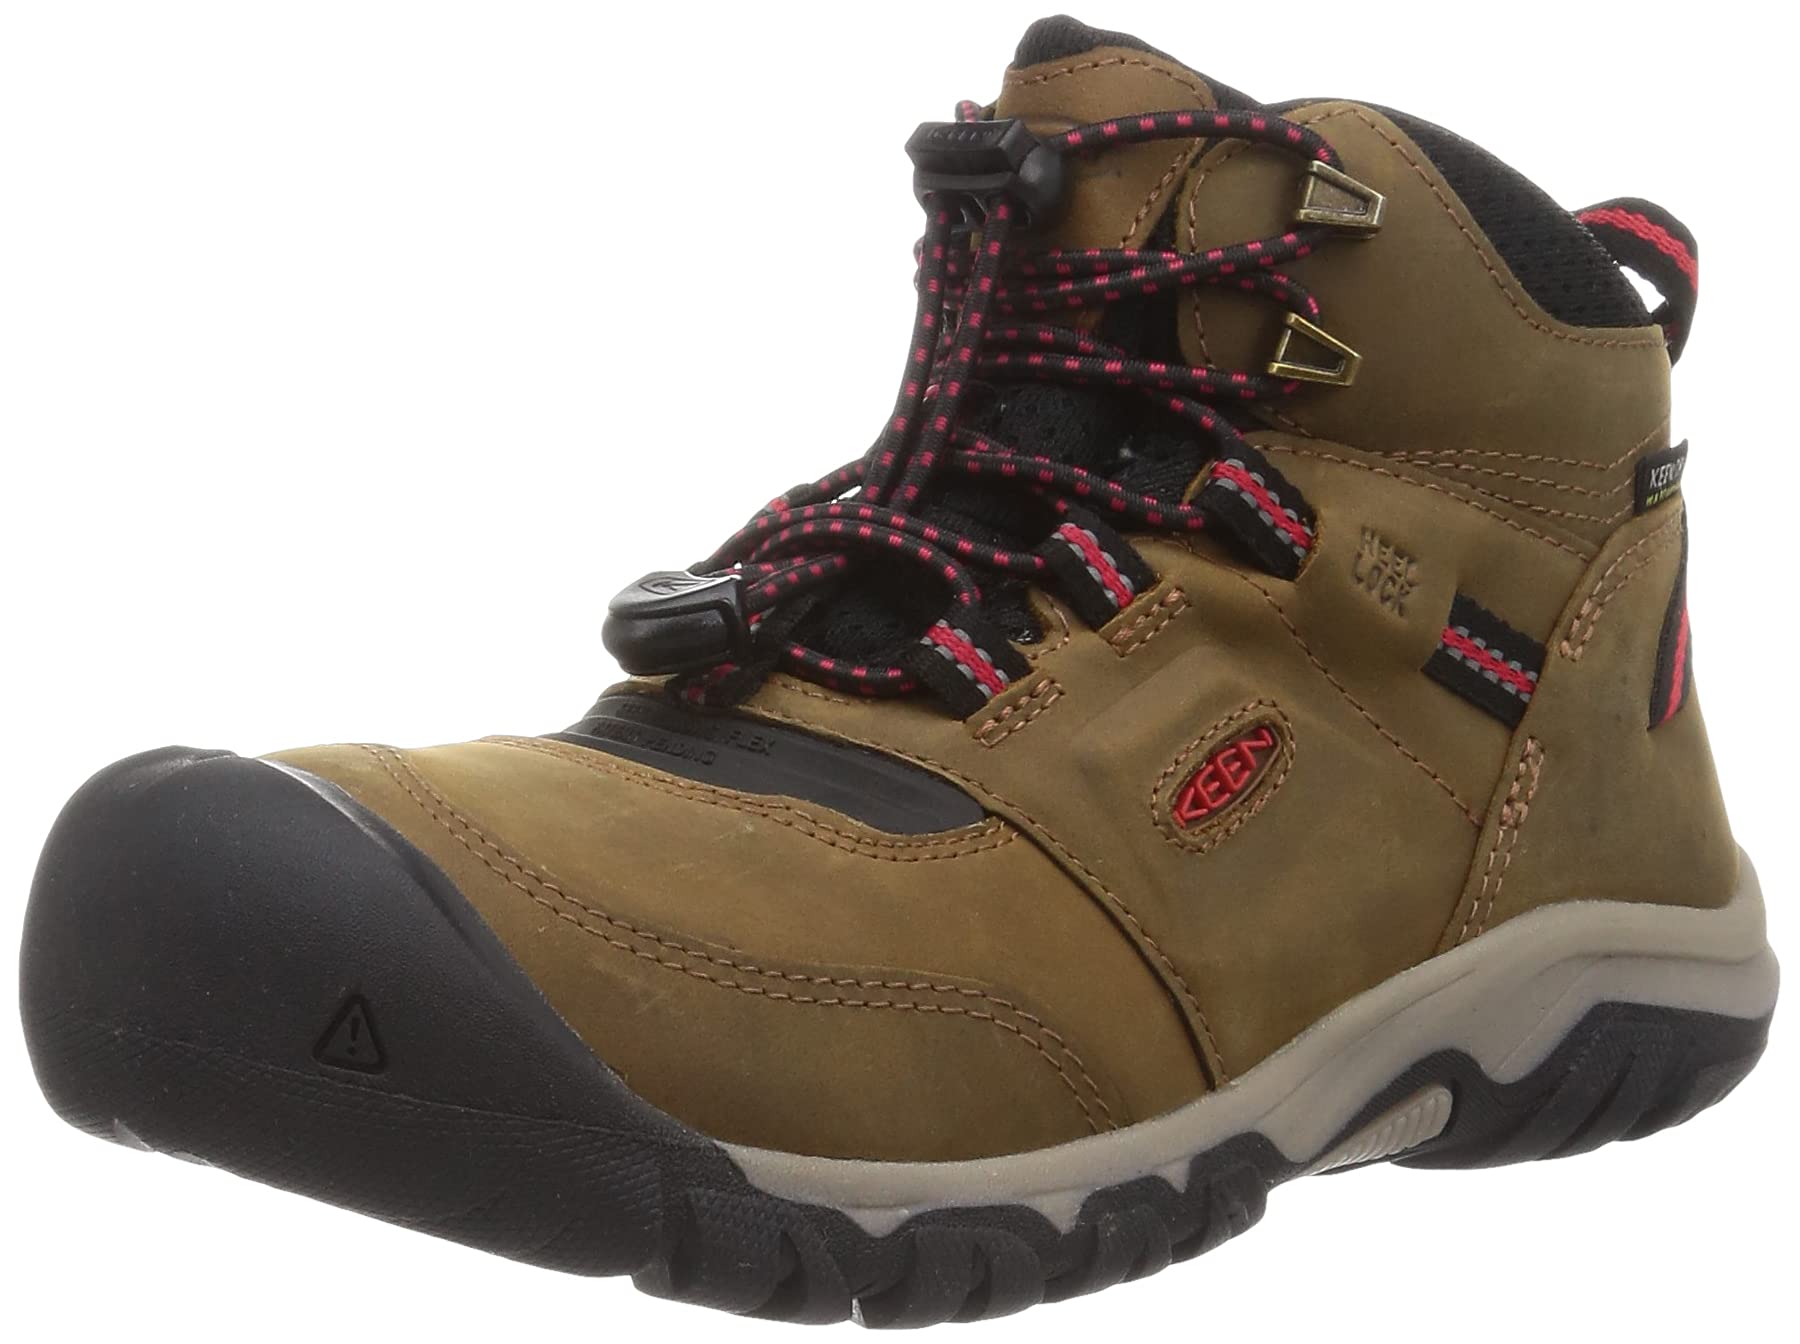 KEEN Unisex-Child Redwood Winter Mid Height Leather Waterproof Hiking Boots